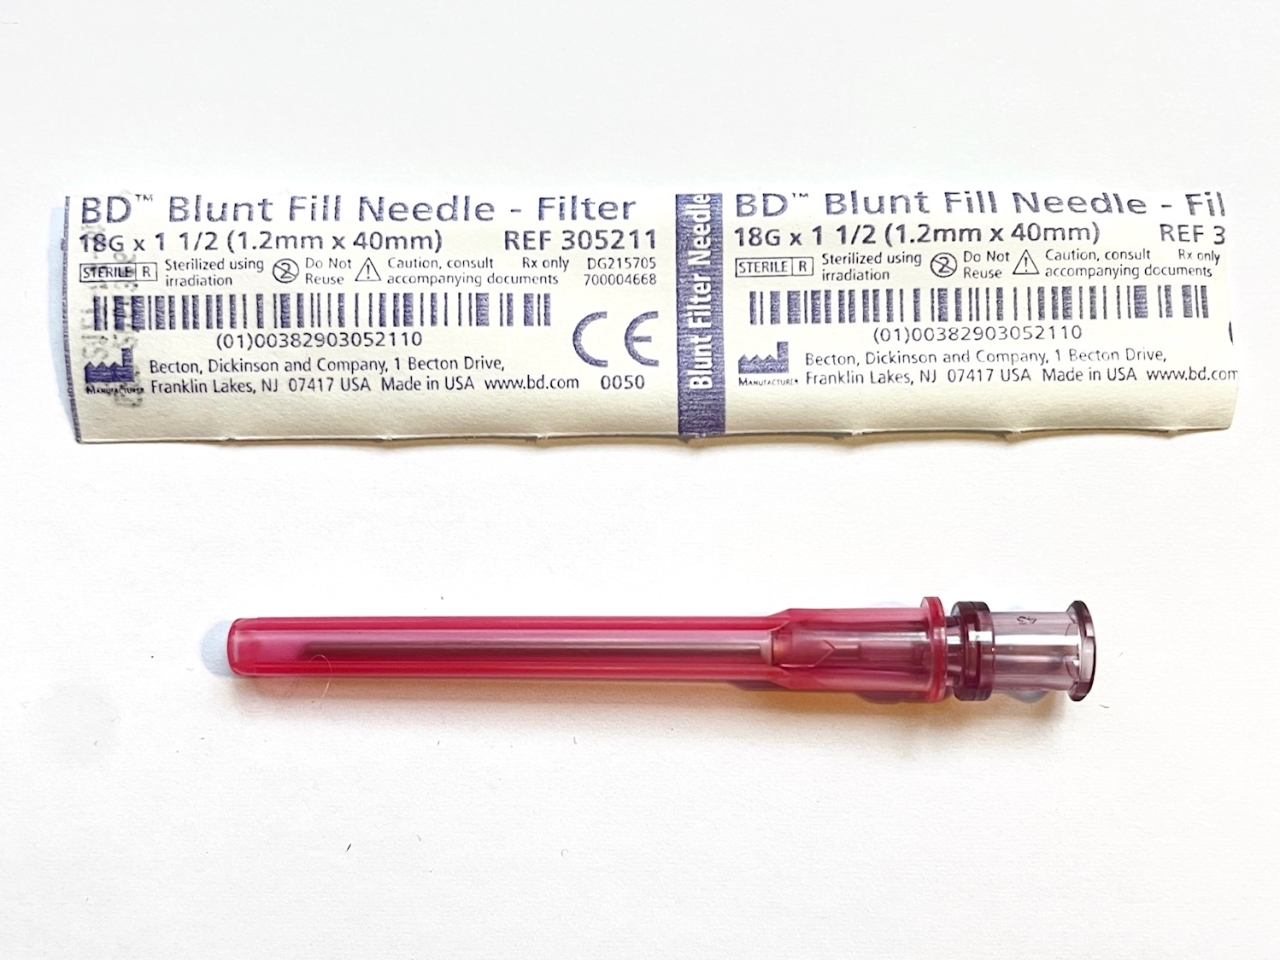 BD 18 gauge x 1 1/2 inch blunt ended needle filter - 5 micron